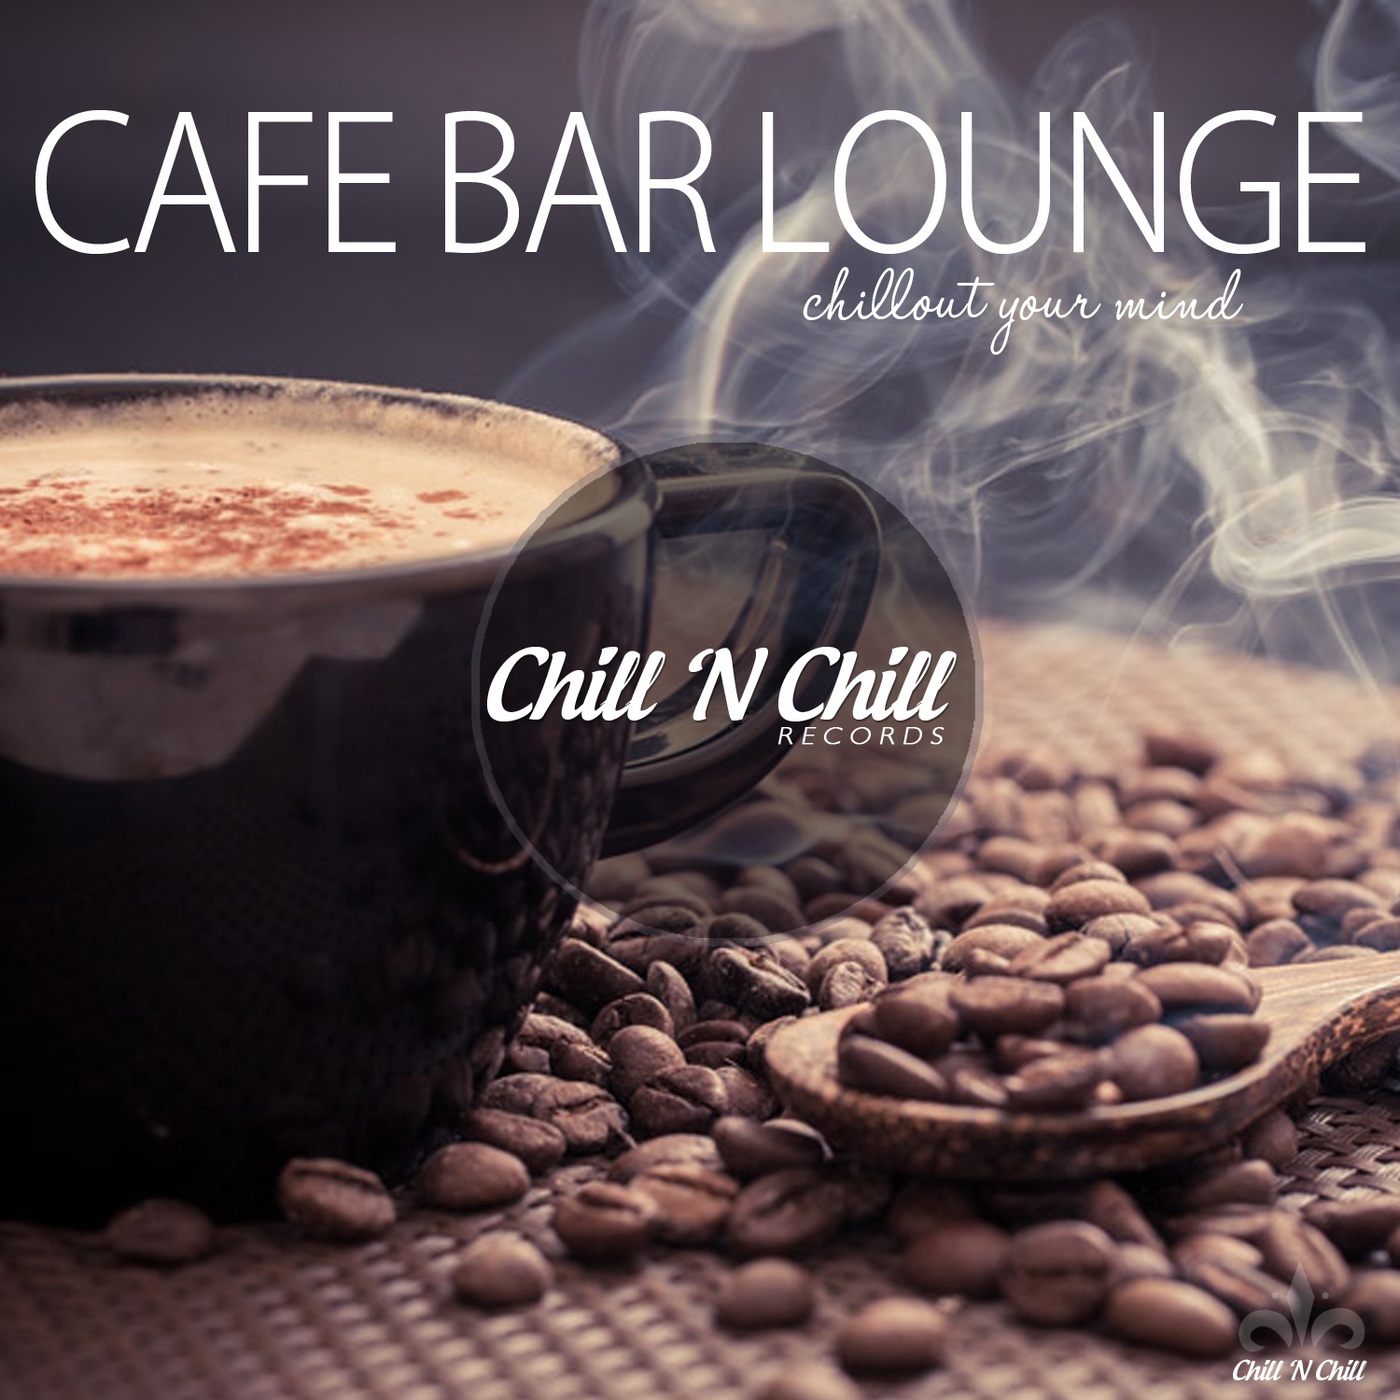 chill n chill records《cafe bar lounge：chillout your mind》cd级无损